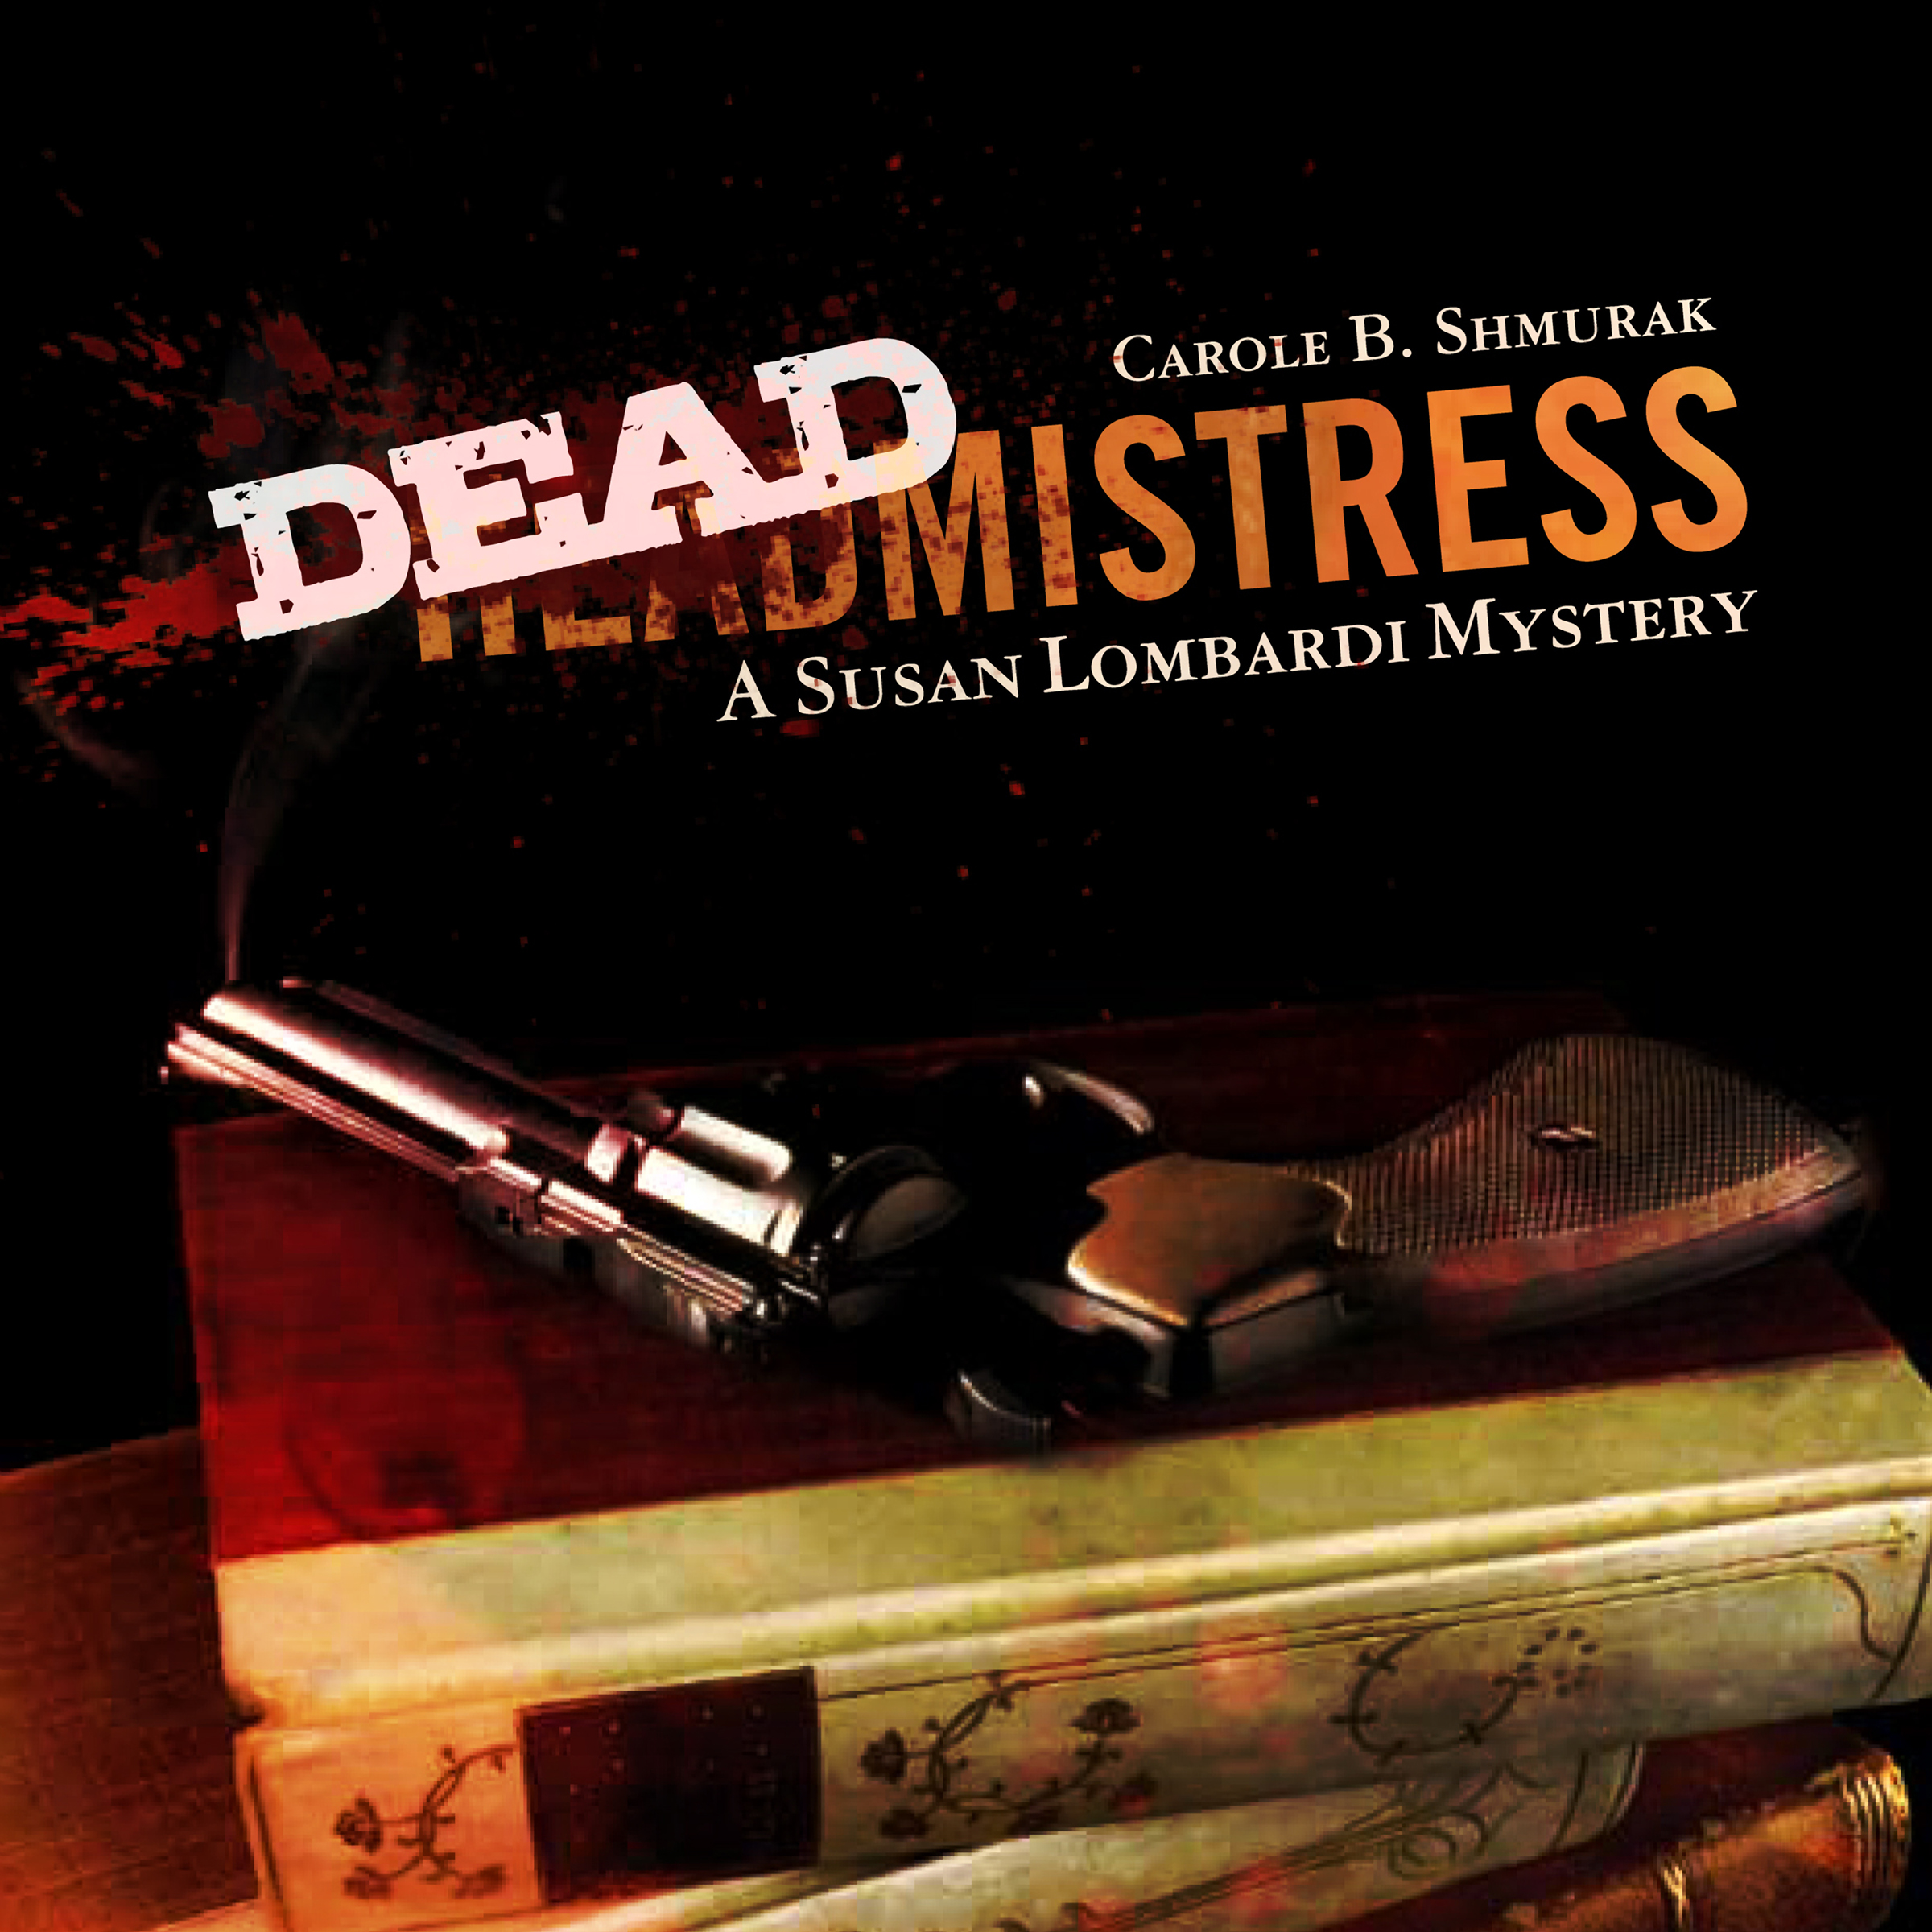 Deadmistress is now available as an audiobook